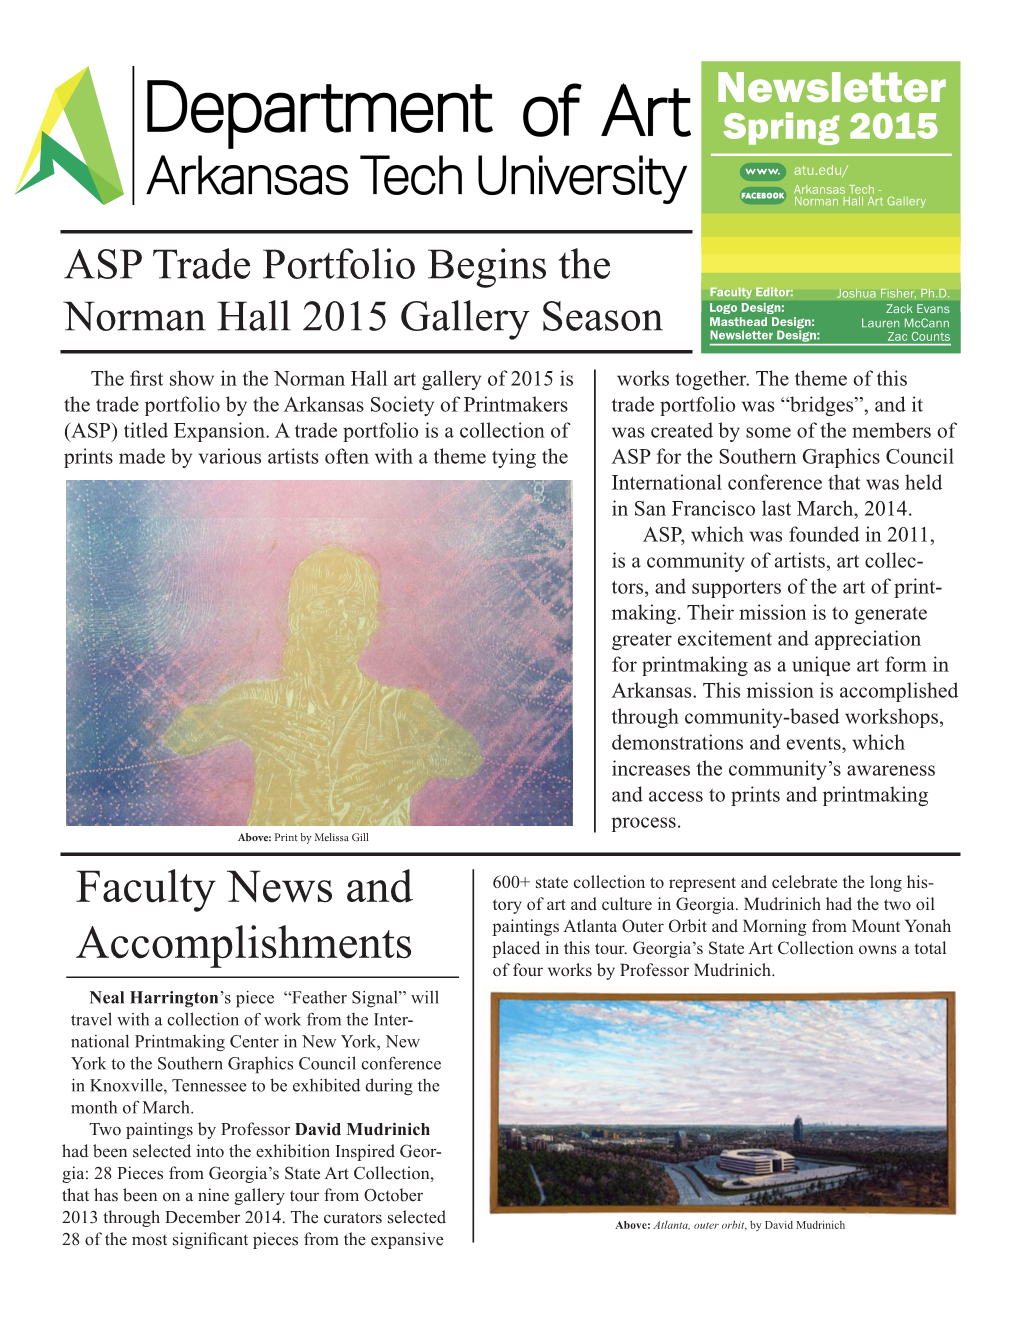 Faculty News and Accomplishments